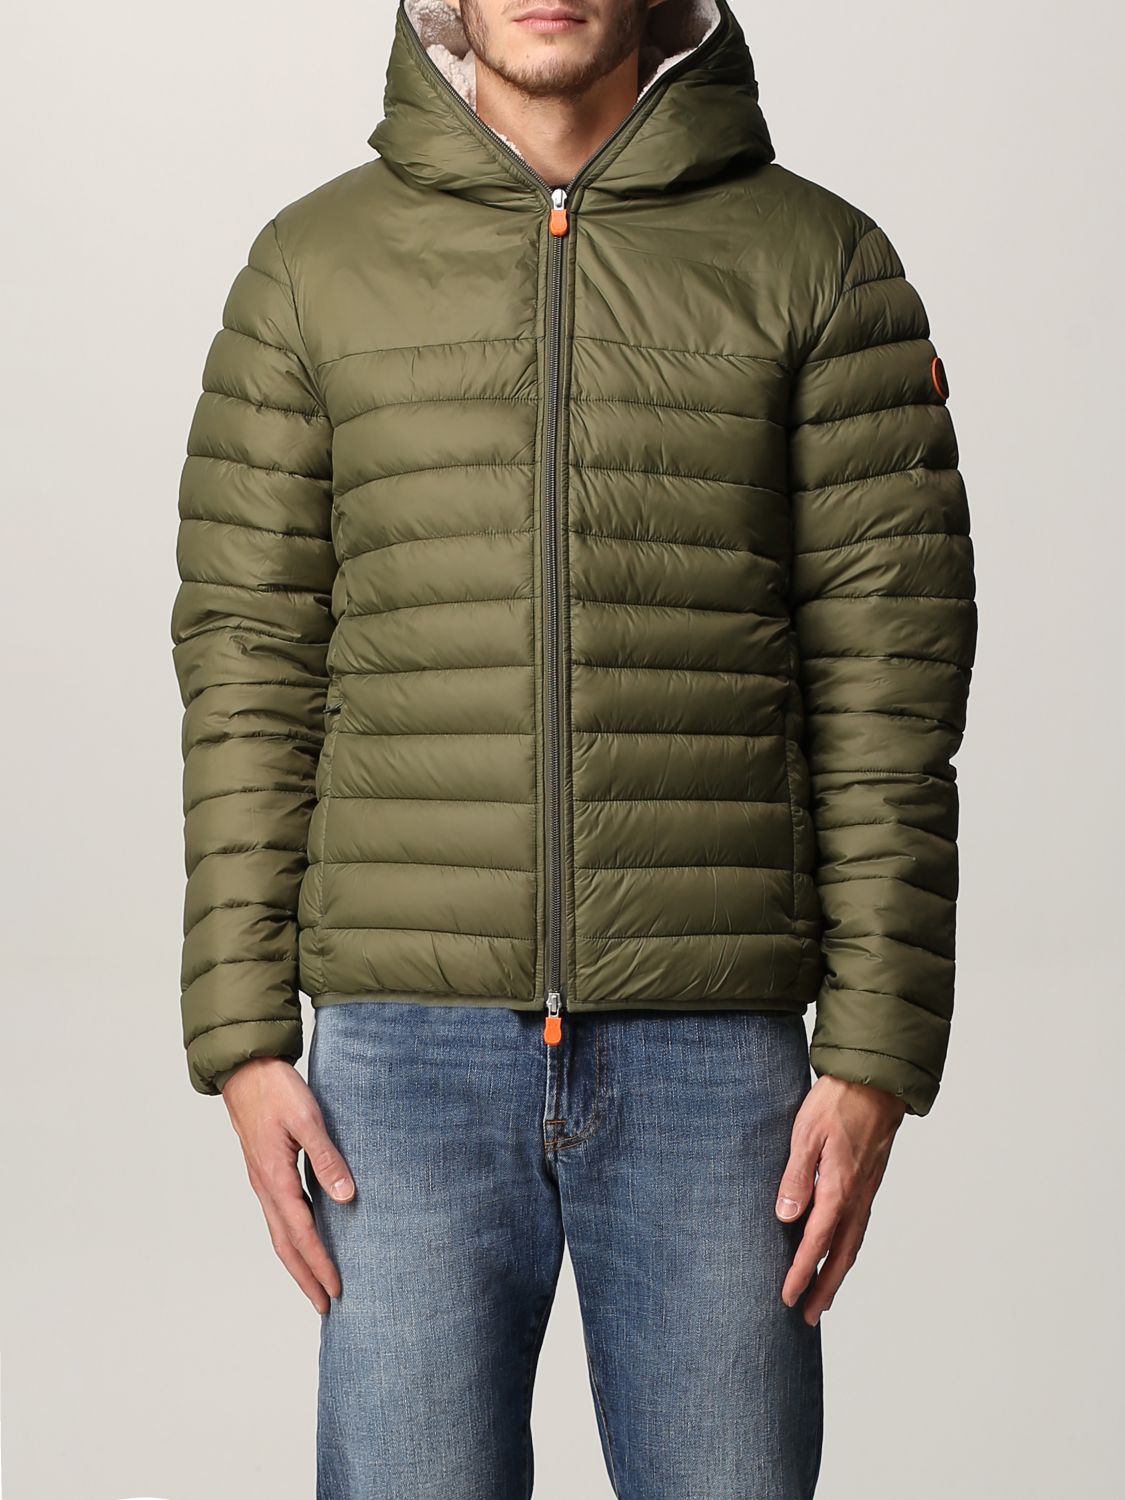 Jacket Save The Duck: Save The Duck jacket for men green 1